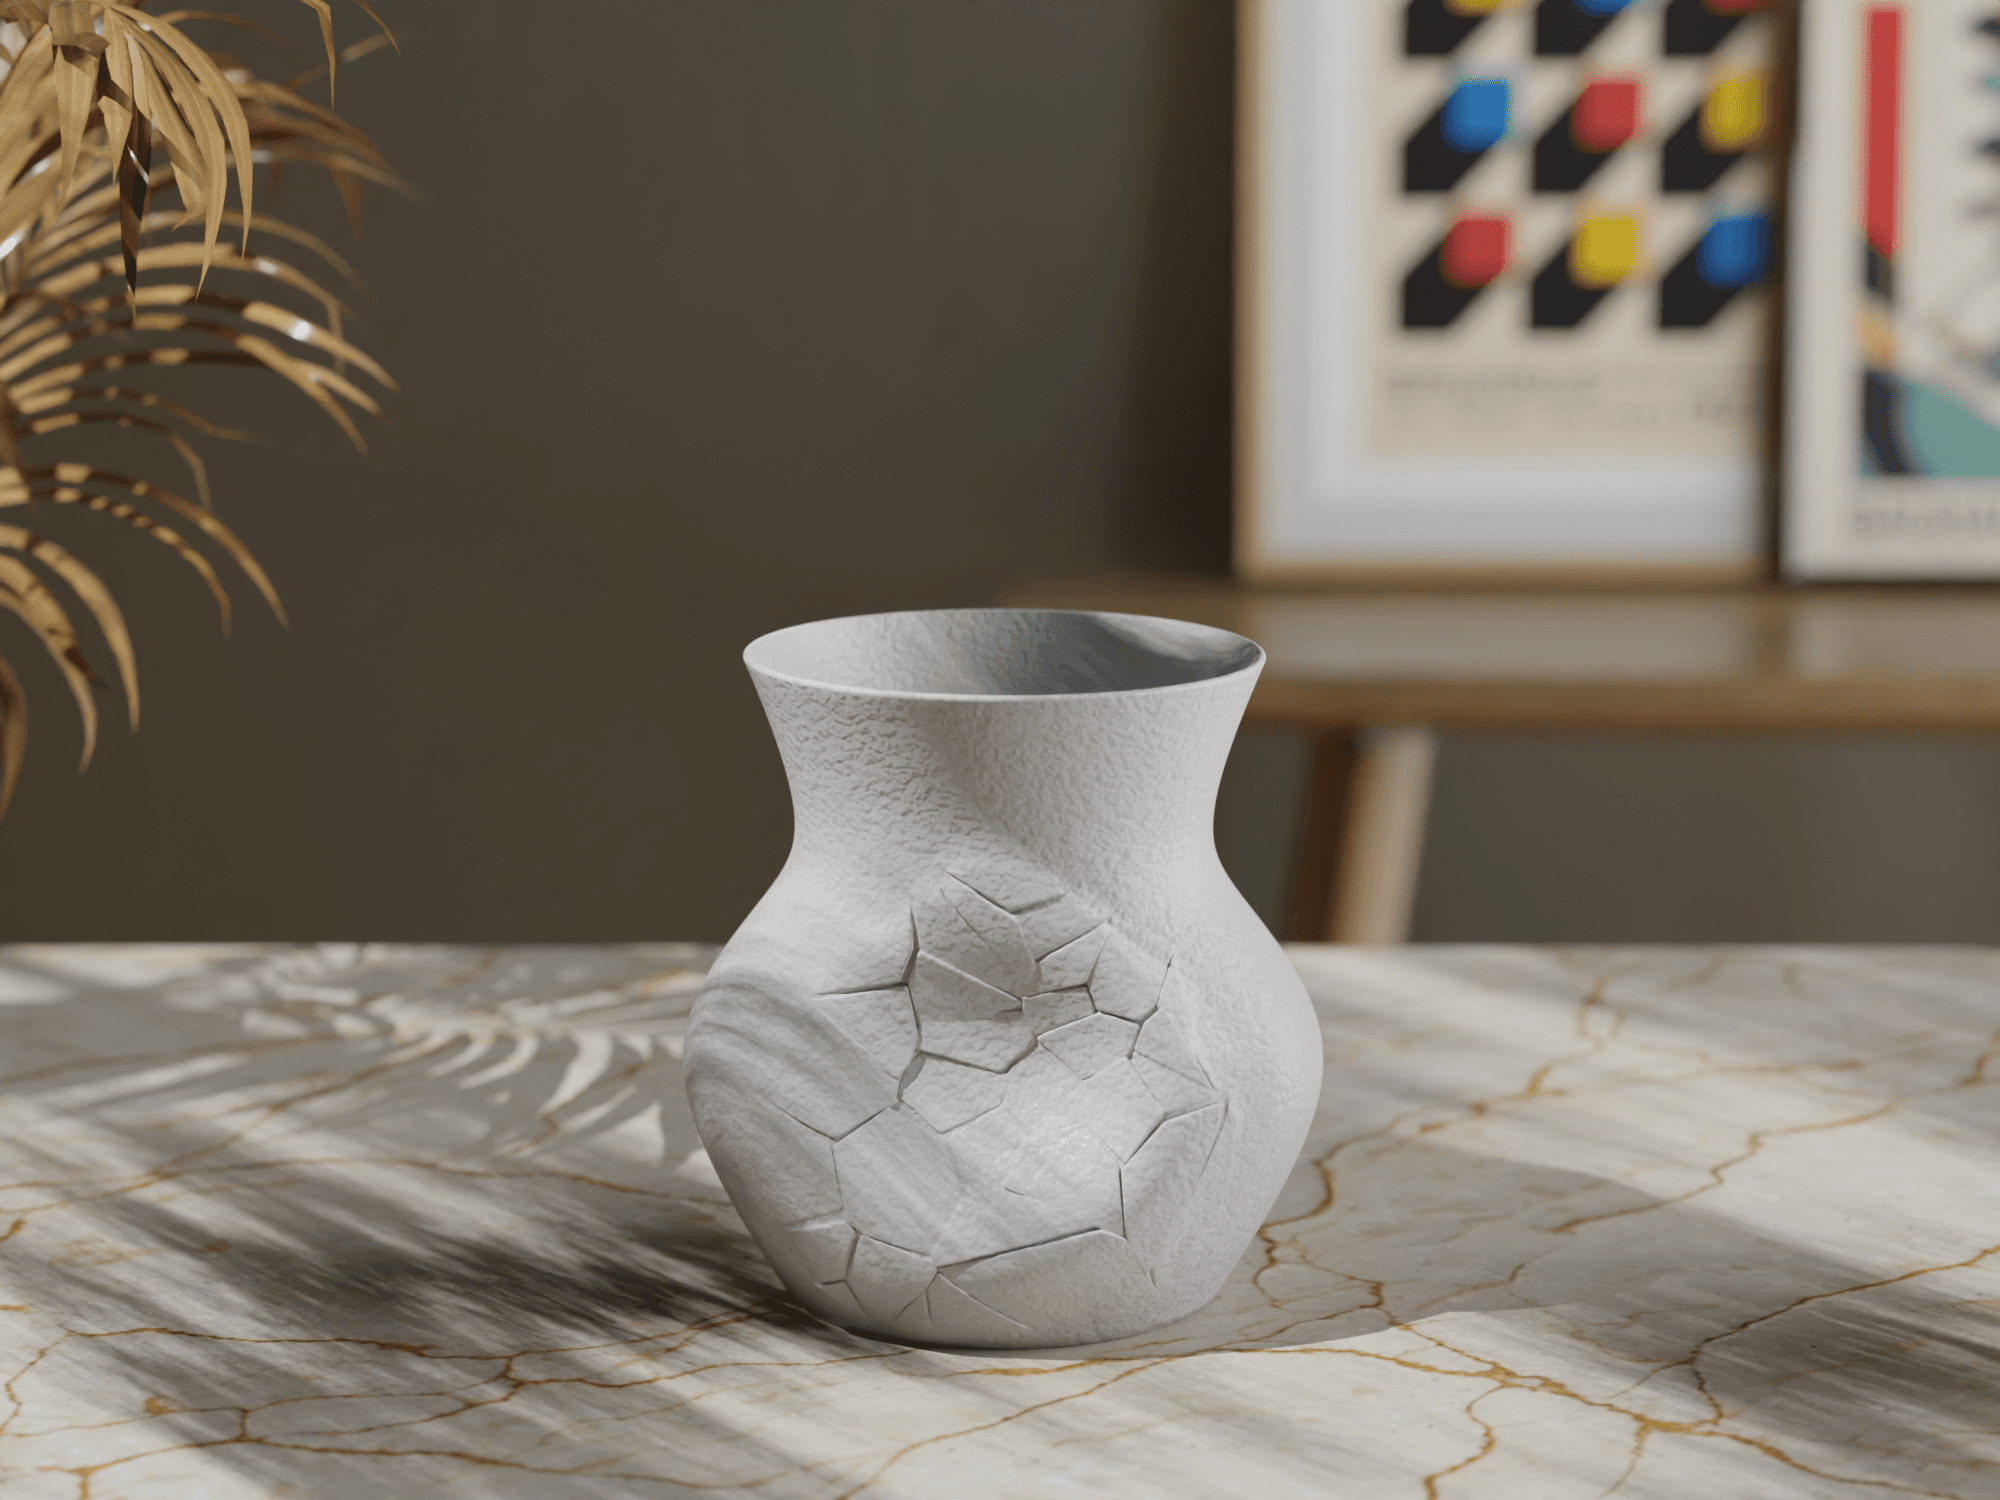 Shattered Pottery: A vase that embraces the beauty of imperfection. ✨